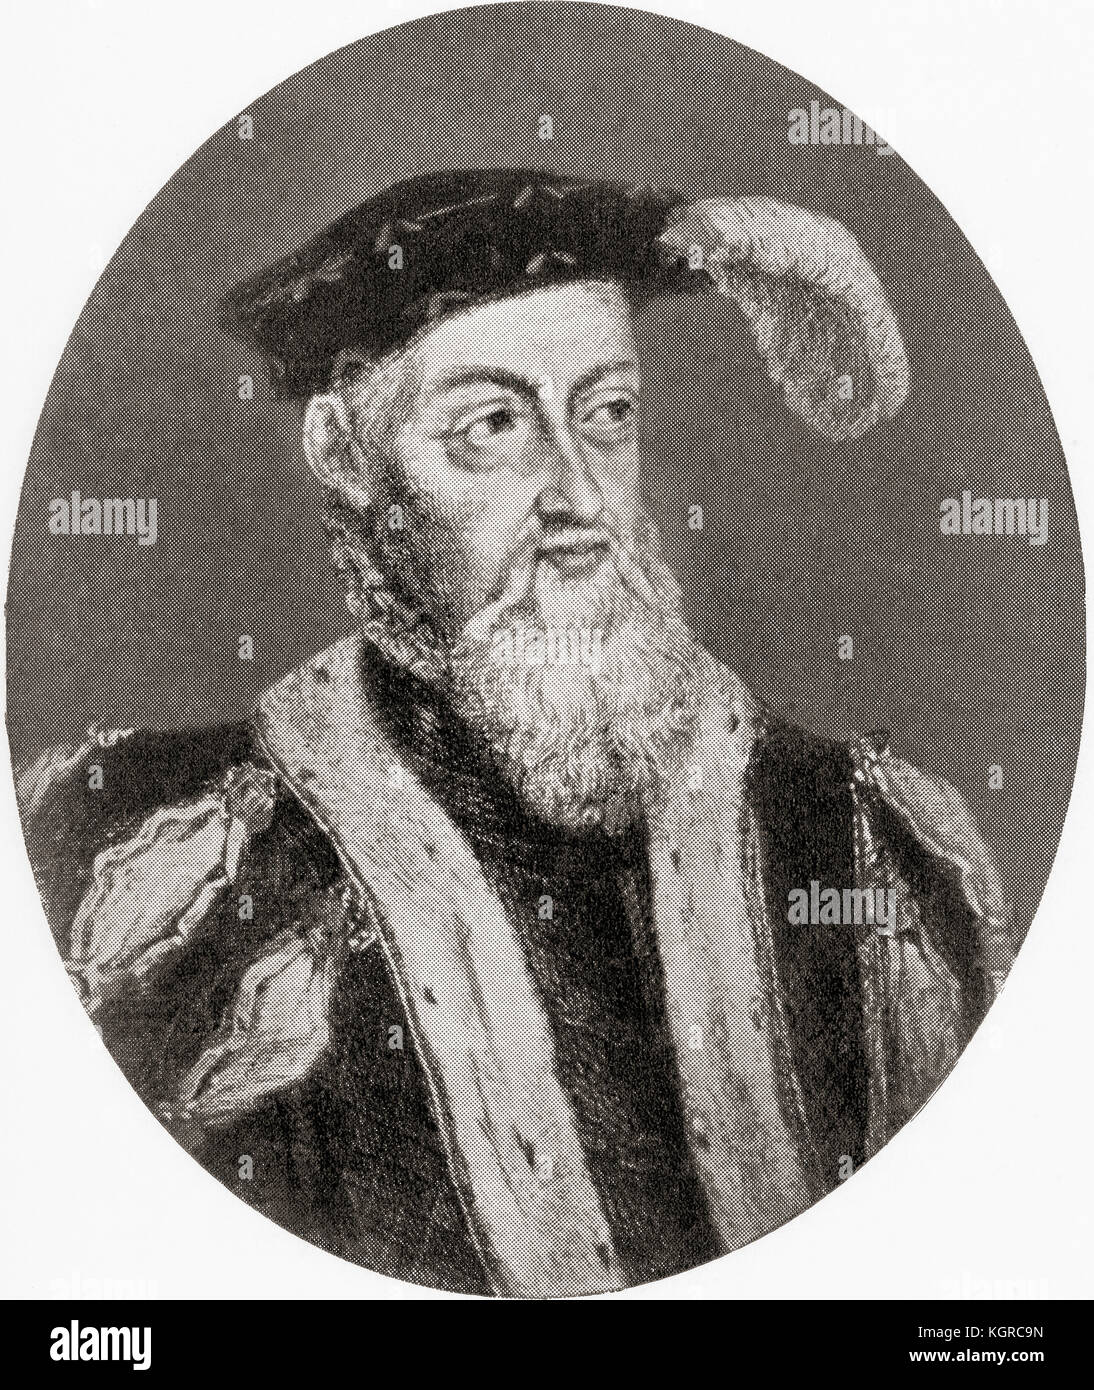 Christian III of Denmark, 1503 – 1559.  King of Denmark, 1534 - 1559 and King of Norway, 1537 - 1559.  From Hutchinson's History of the Nations, published 1915. Stock Photo